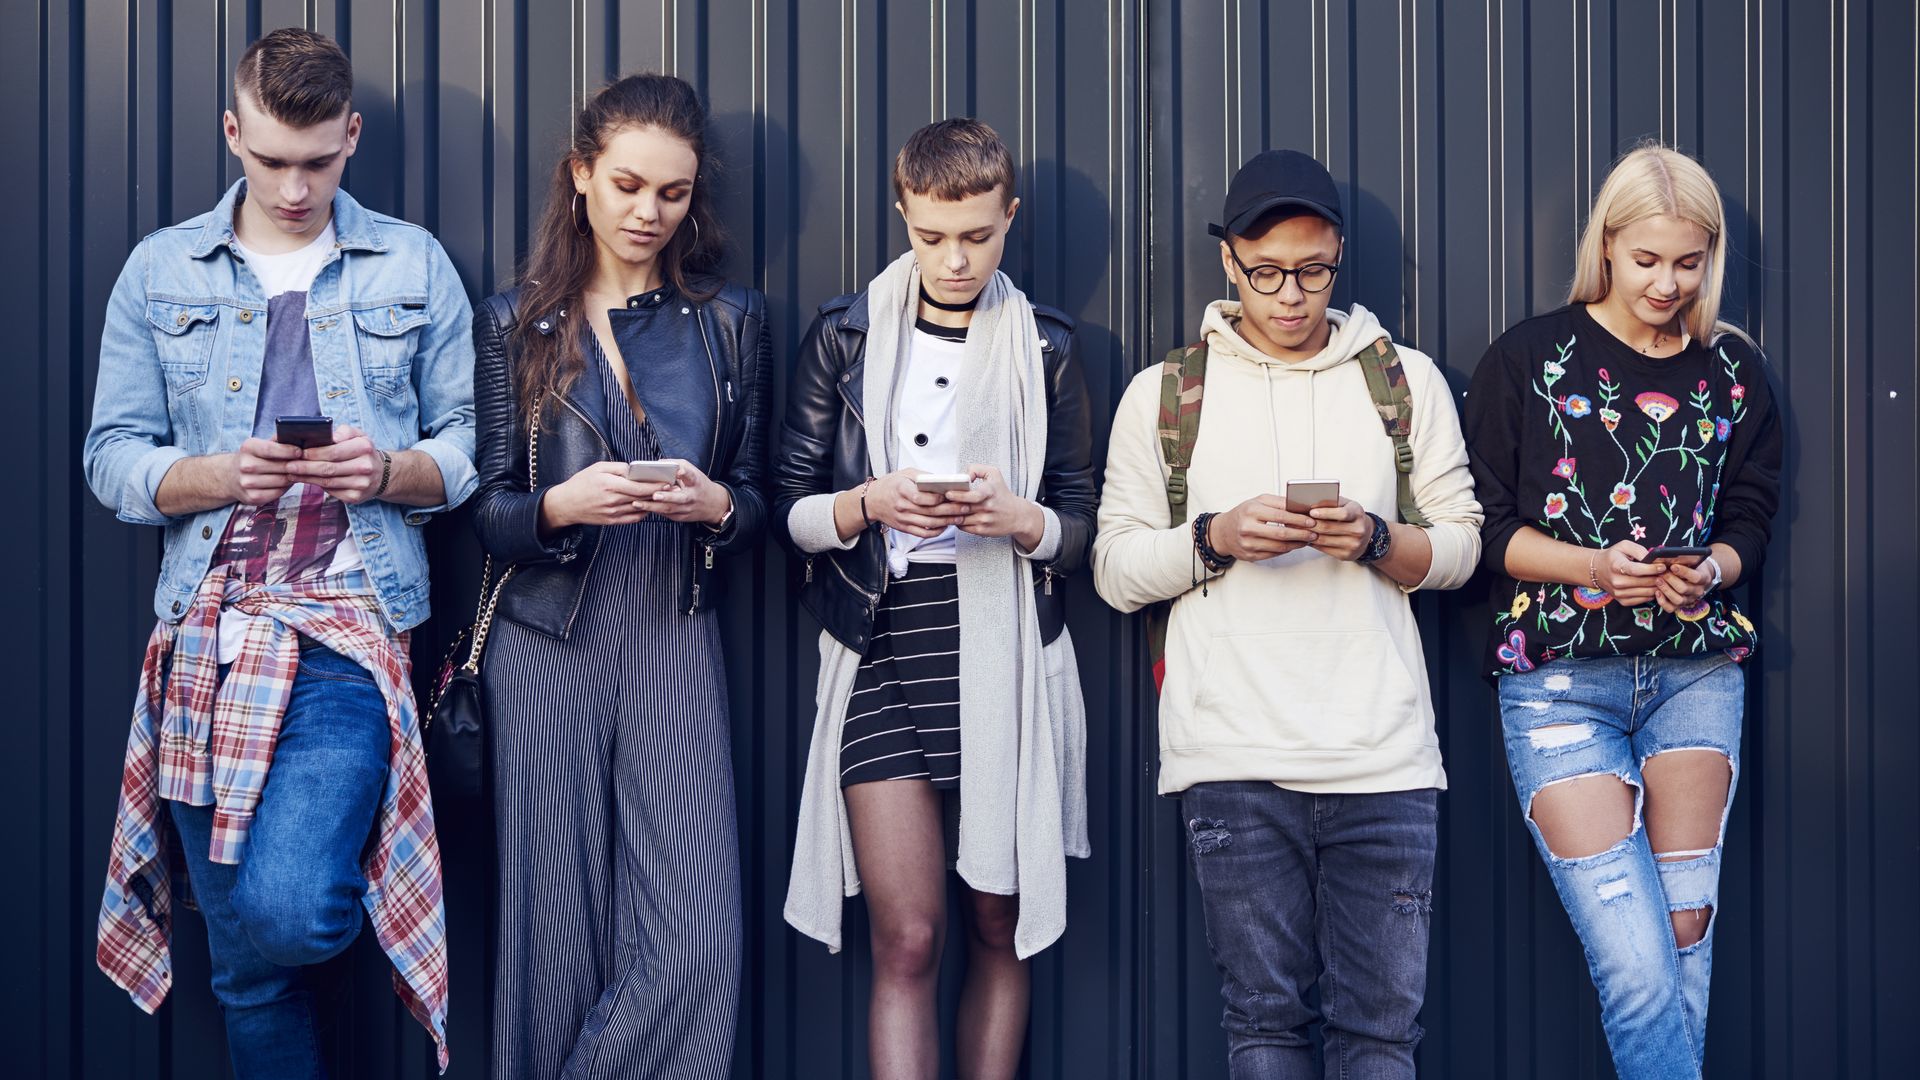 In this image, five fashionably dressed young adults look at their phones while standing in a line against a wall.